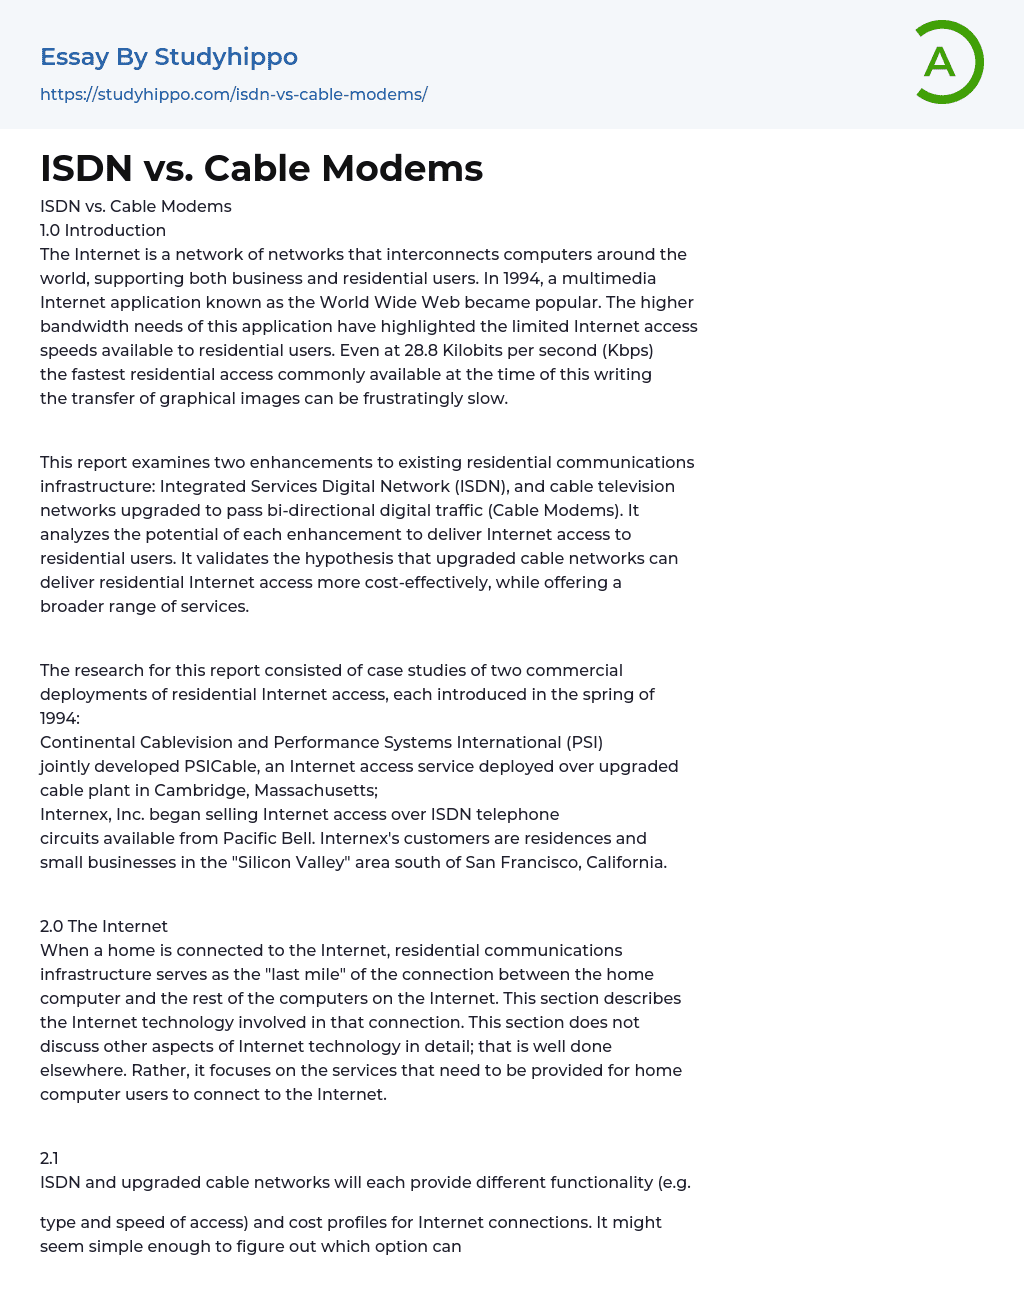 ISDN vs. Cable Modems Essay Example